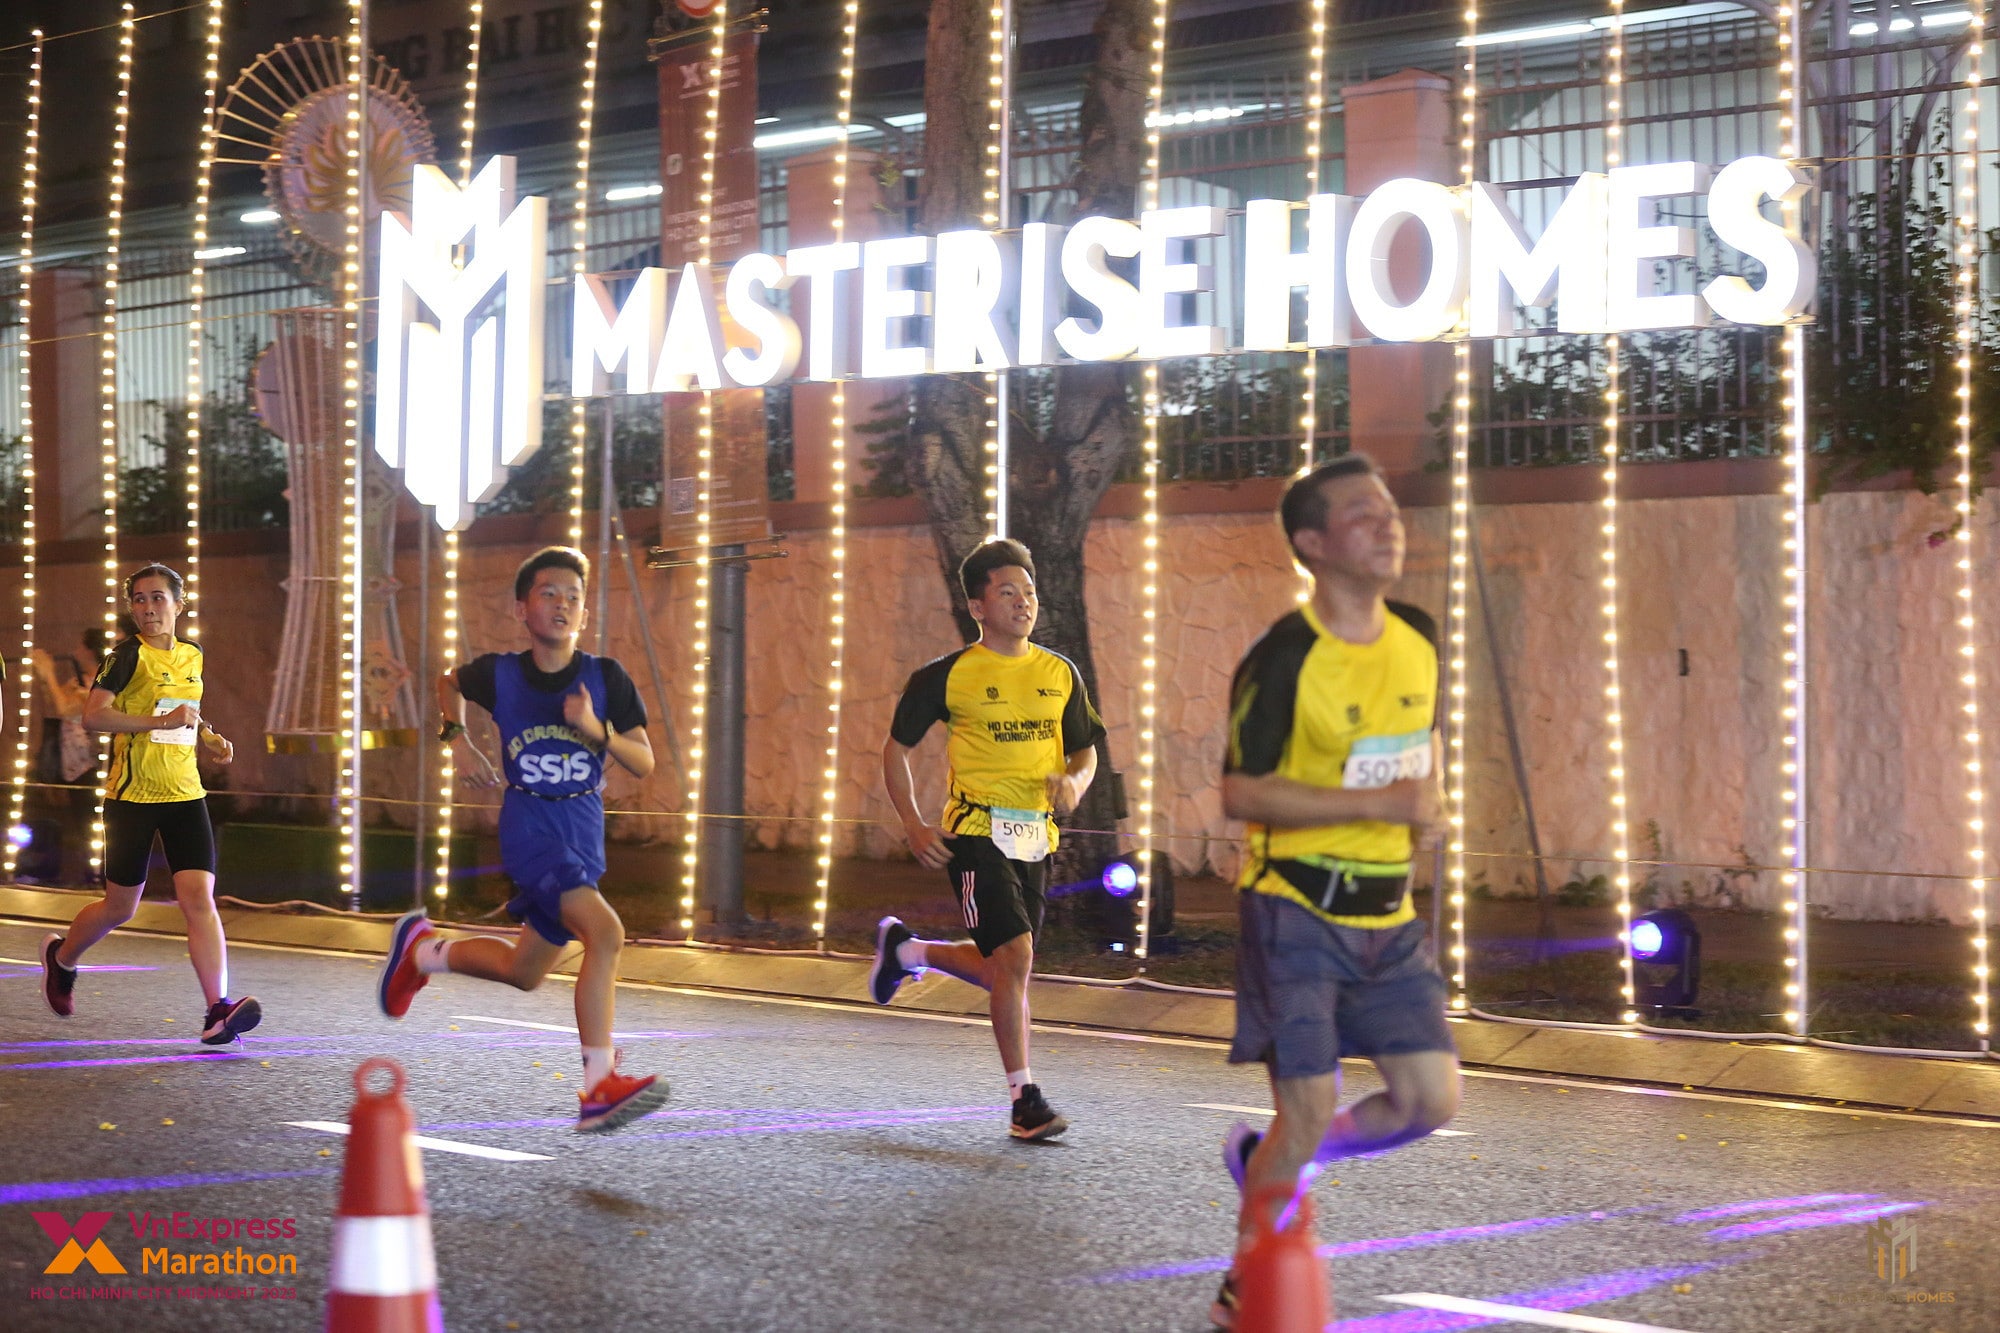 MASTERISE HOMES JOINS OVER 10,000 RUNNERS TO COMPLETE THE FIRST NIGHT RUN IN HO CHI MINH CITY.